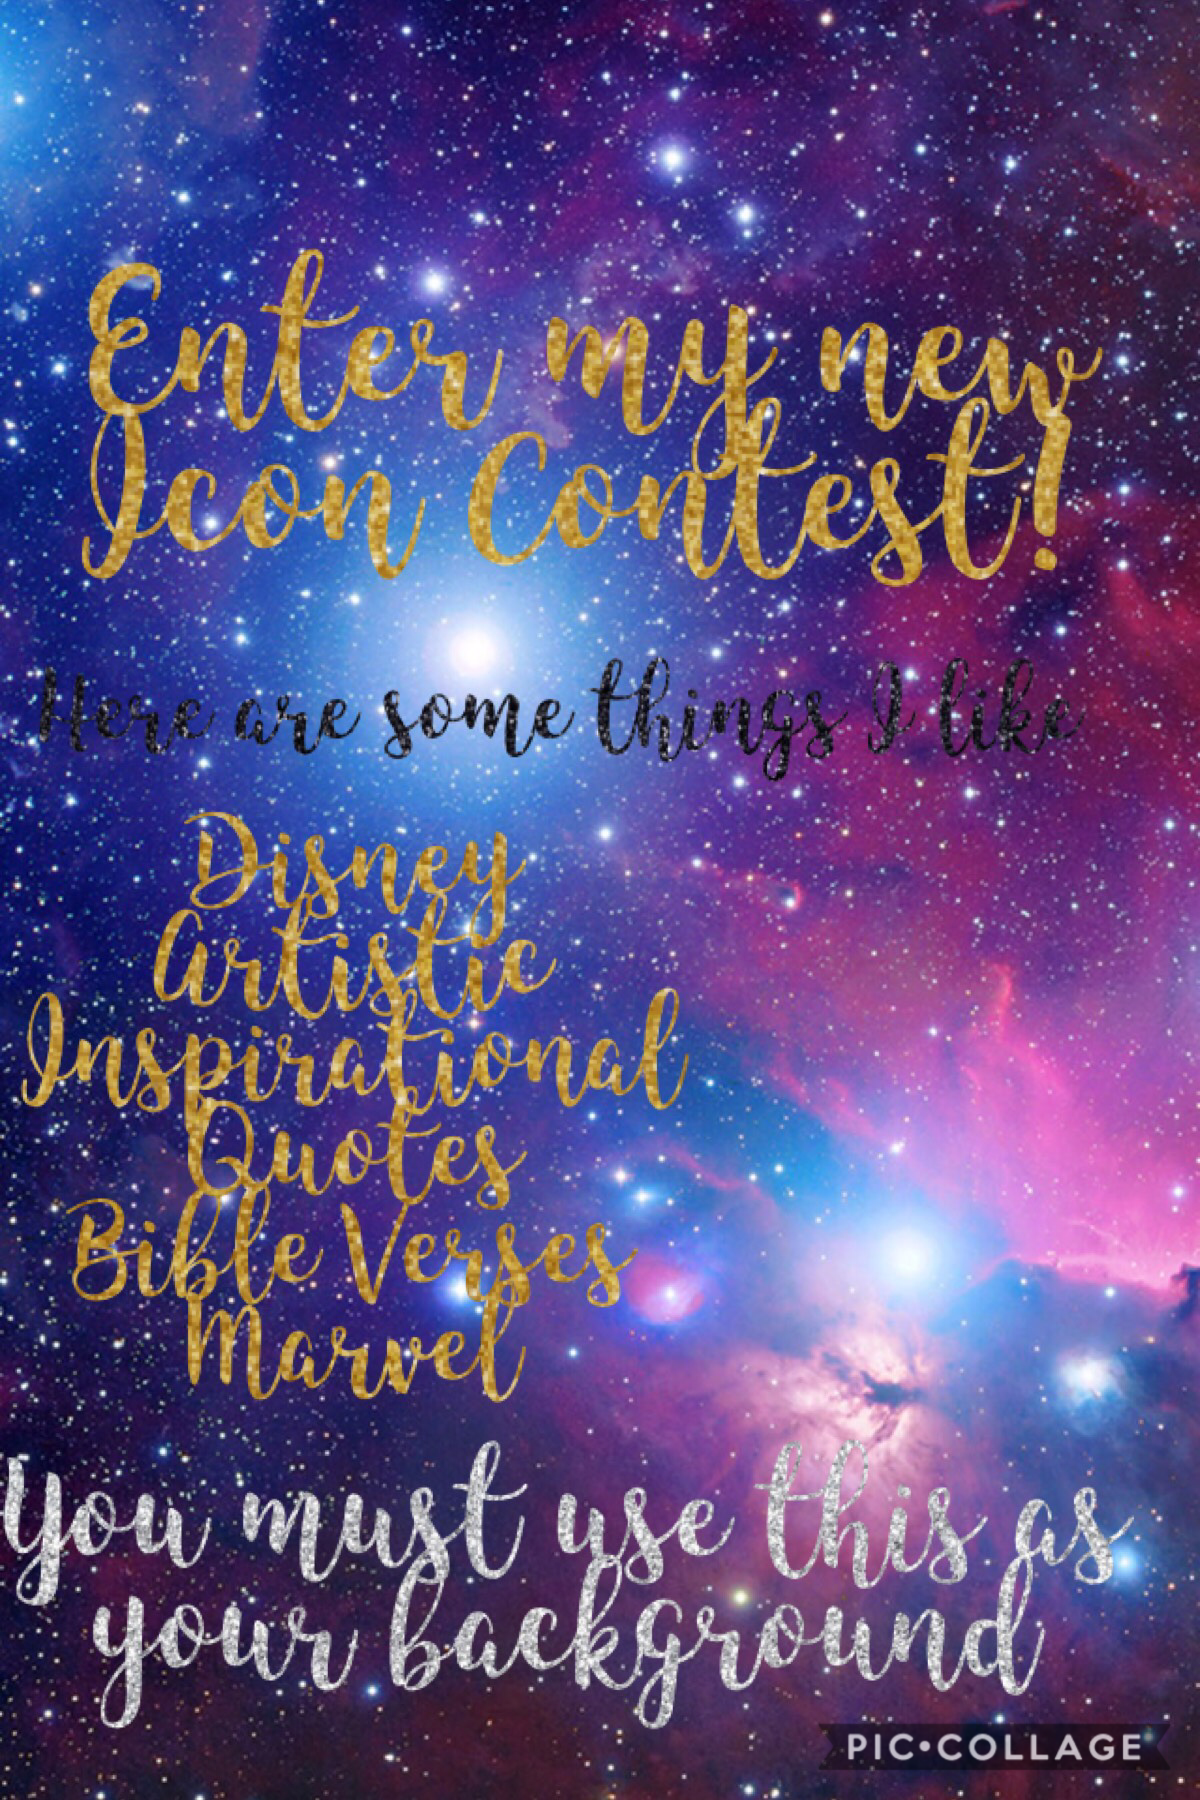 I have my first icon contest! Make an icon on the remix page and I will post the winners on 9/01/19!